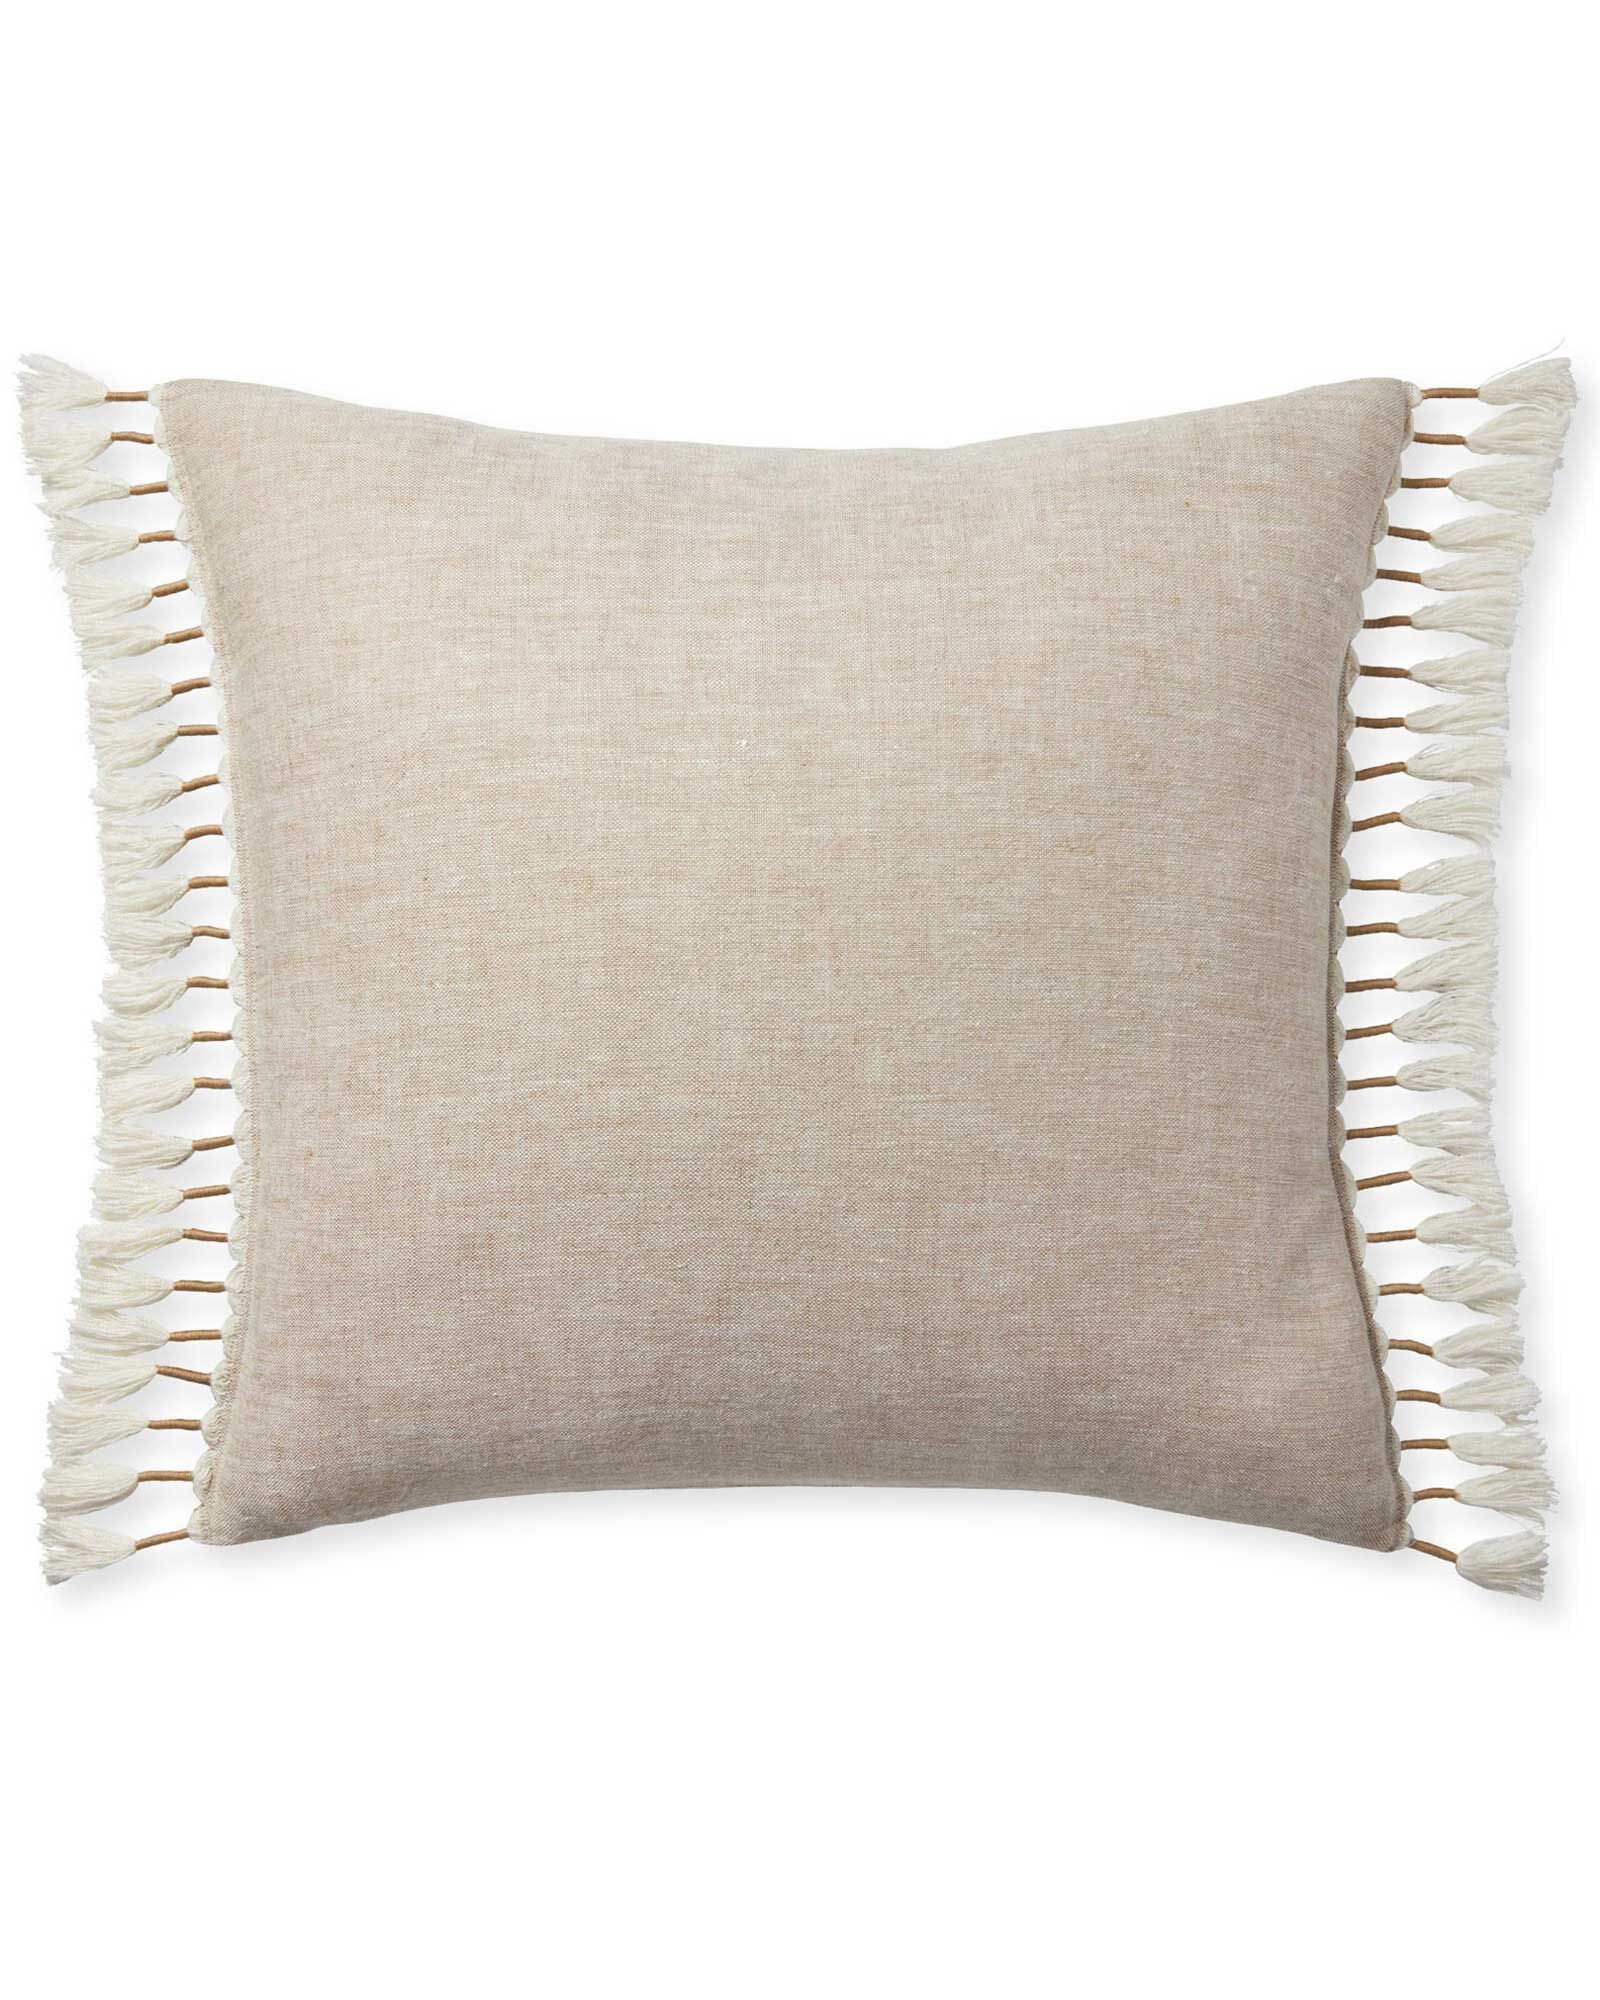 Topanga Pillow Cover | Serena and Lily